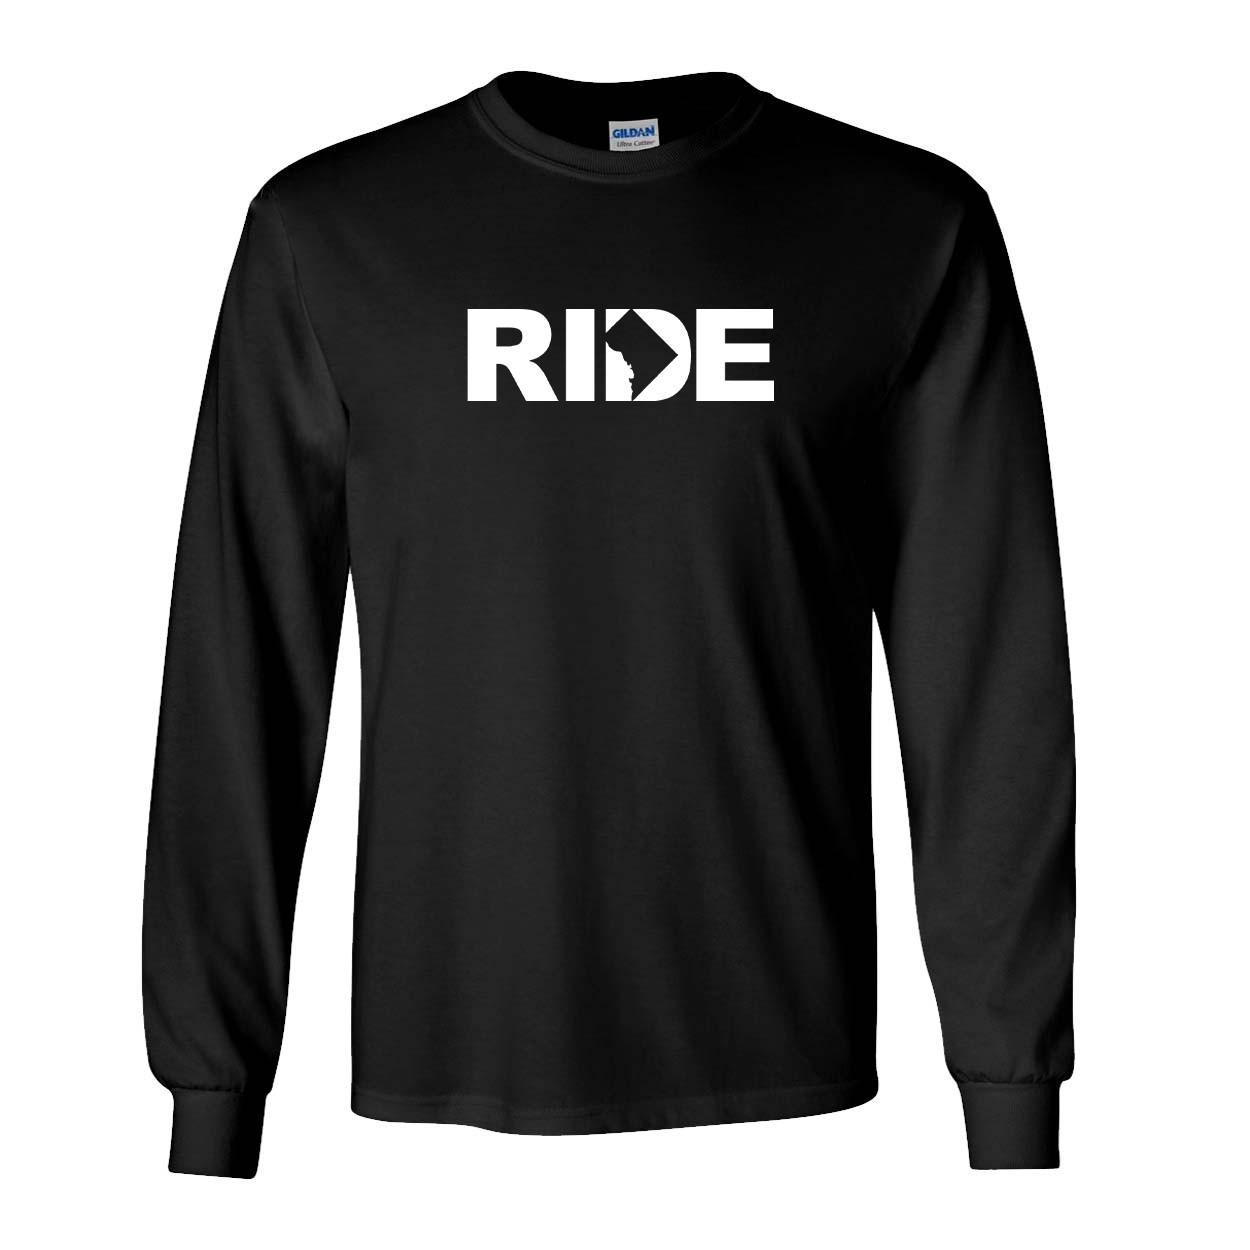 Ride District of Columbia Classic Long Sleeve T-Shirt Black (White Logo)